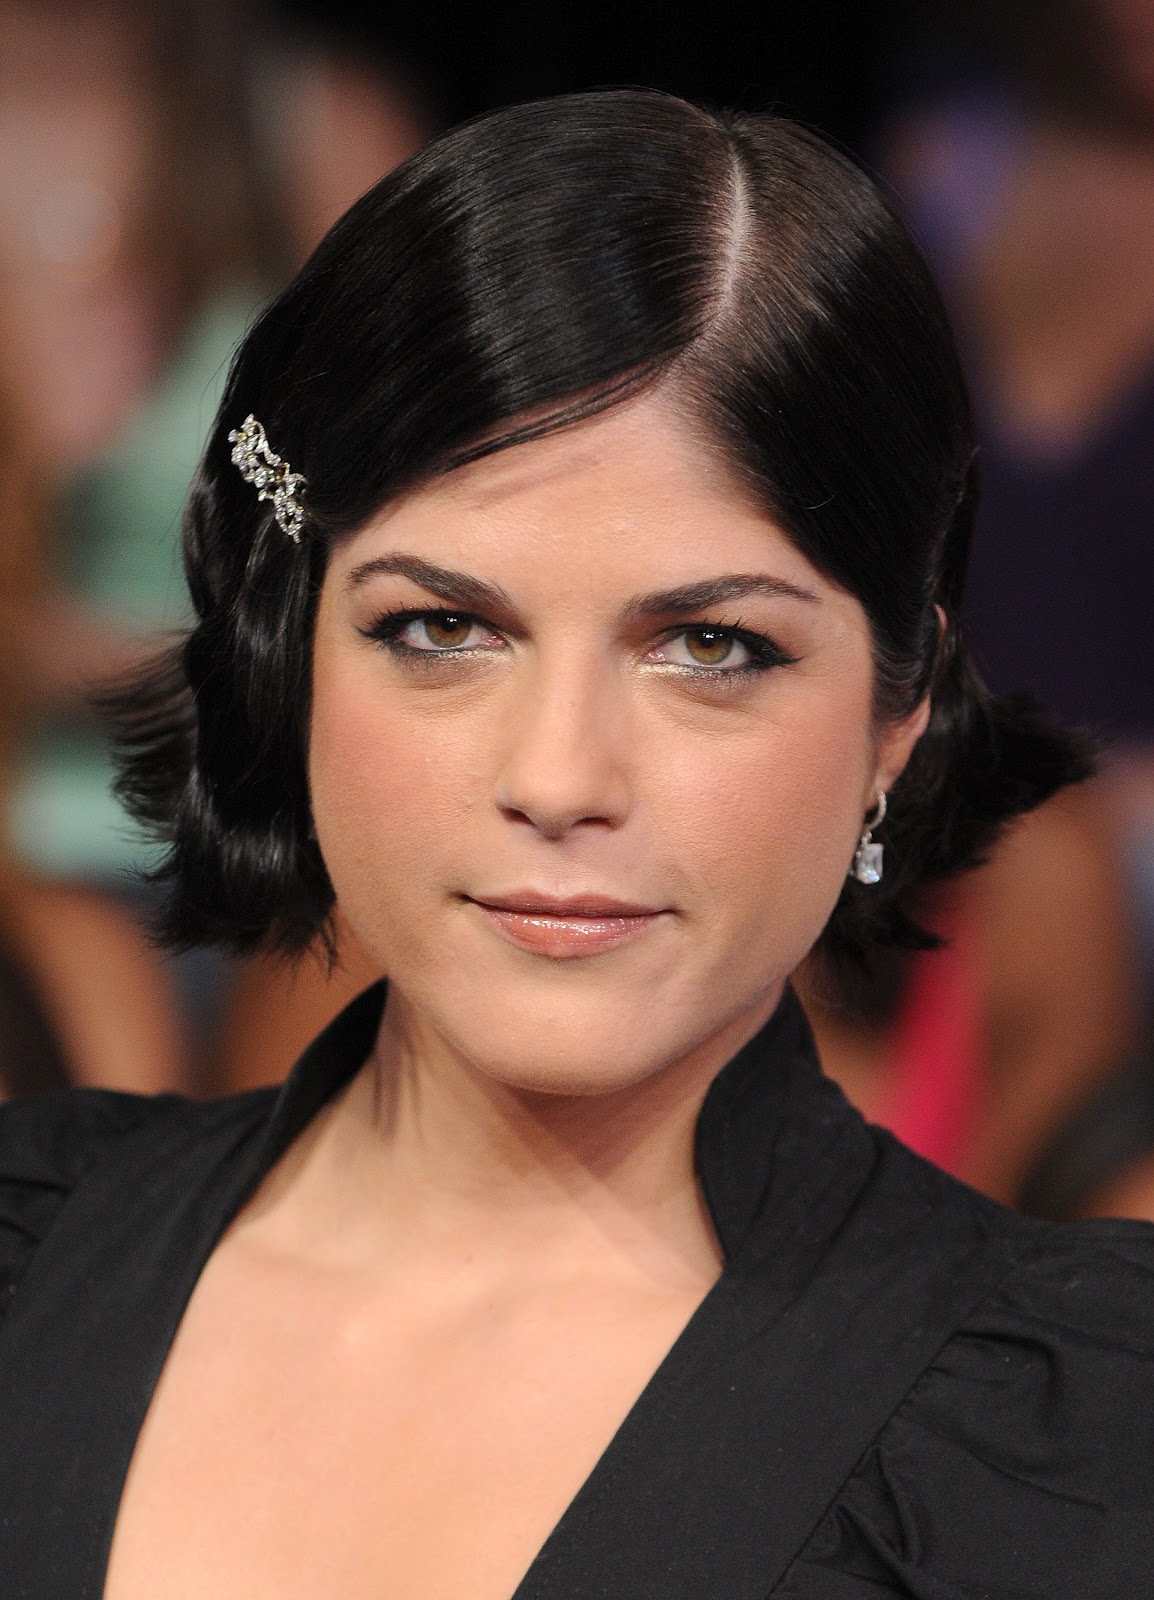 Actress selma blair reveals new details about her multiple sclerosis (ms) i...